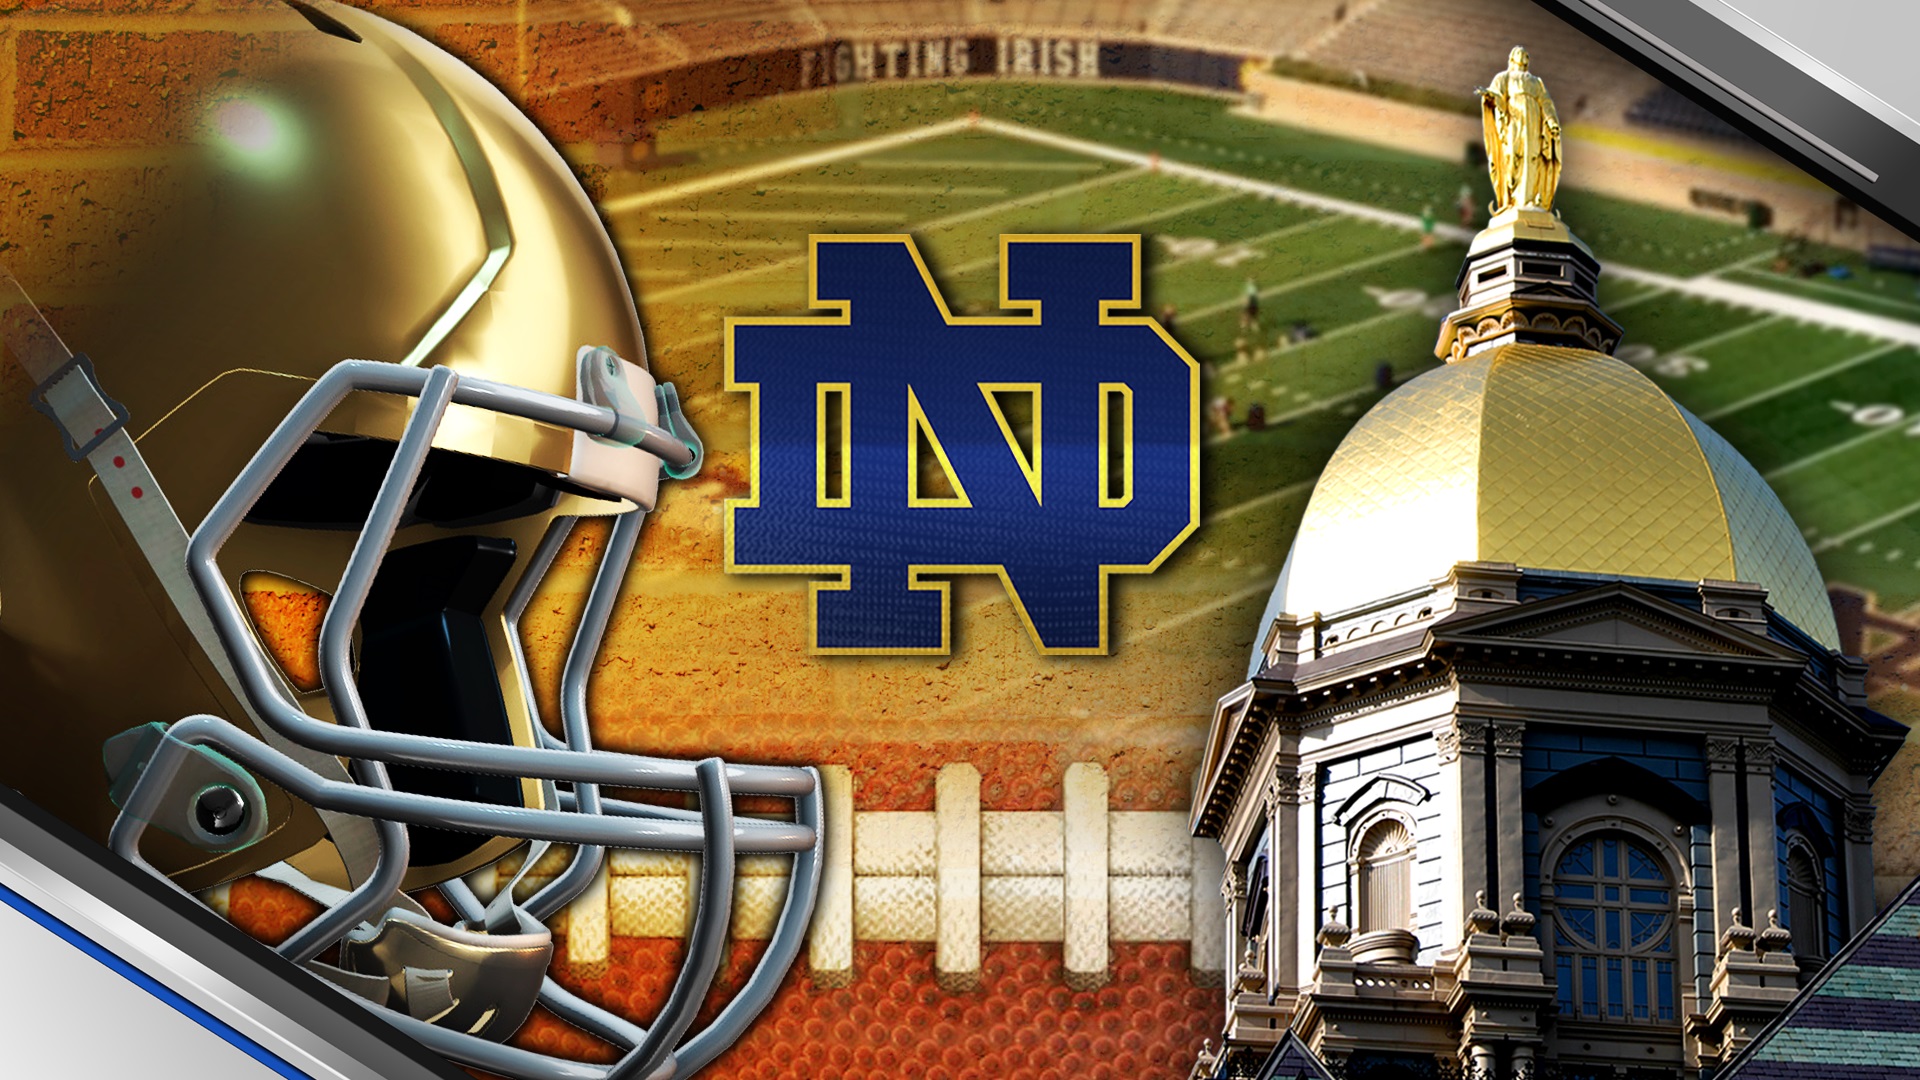 Notre Dame ranked No. 20 in latest College Football Playoff rankings